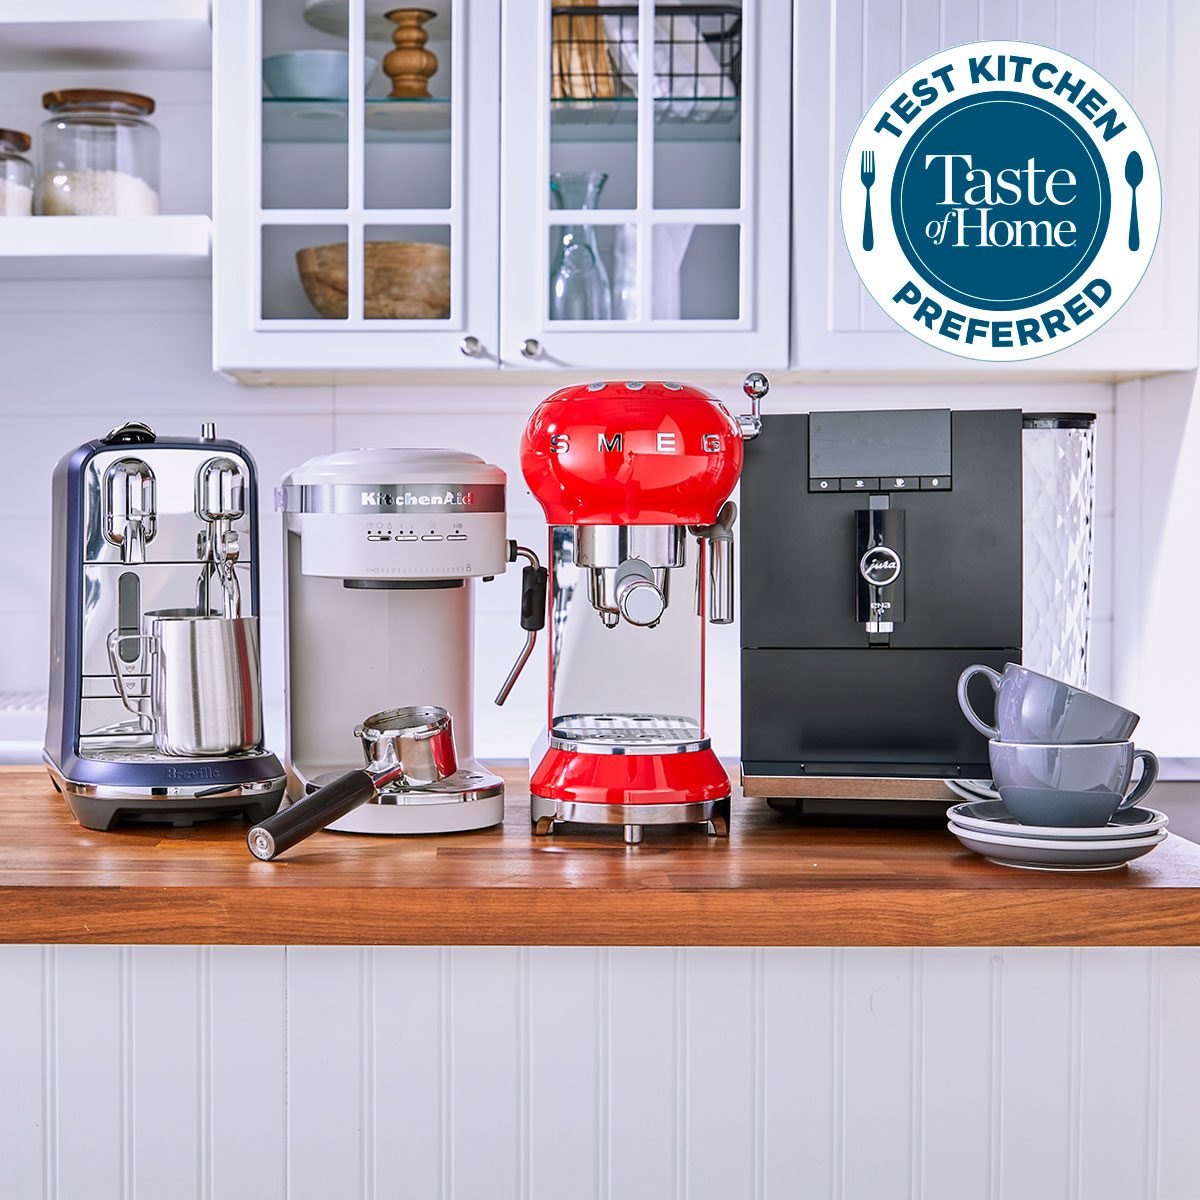 KitchenAid Personal Coffee Maker with Optimized Brewing Technology 